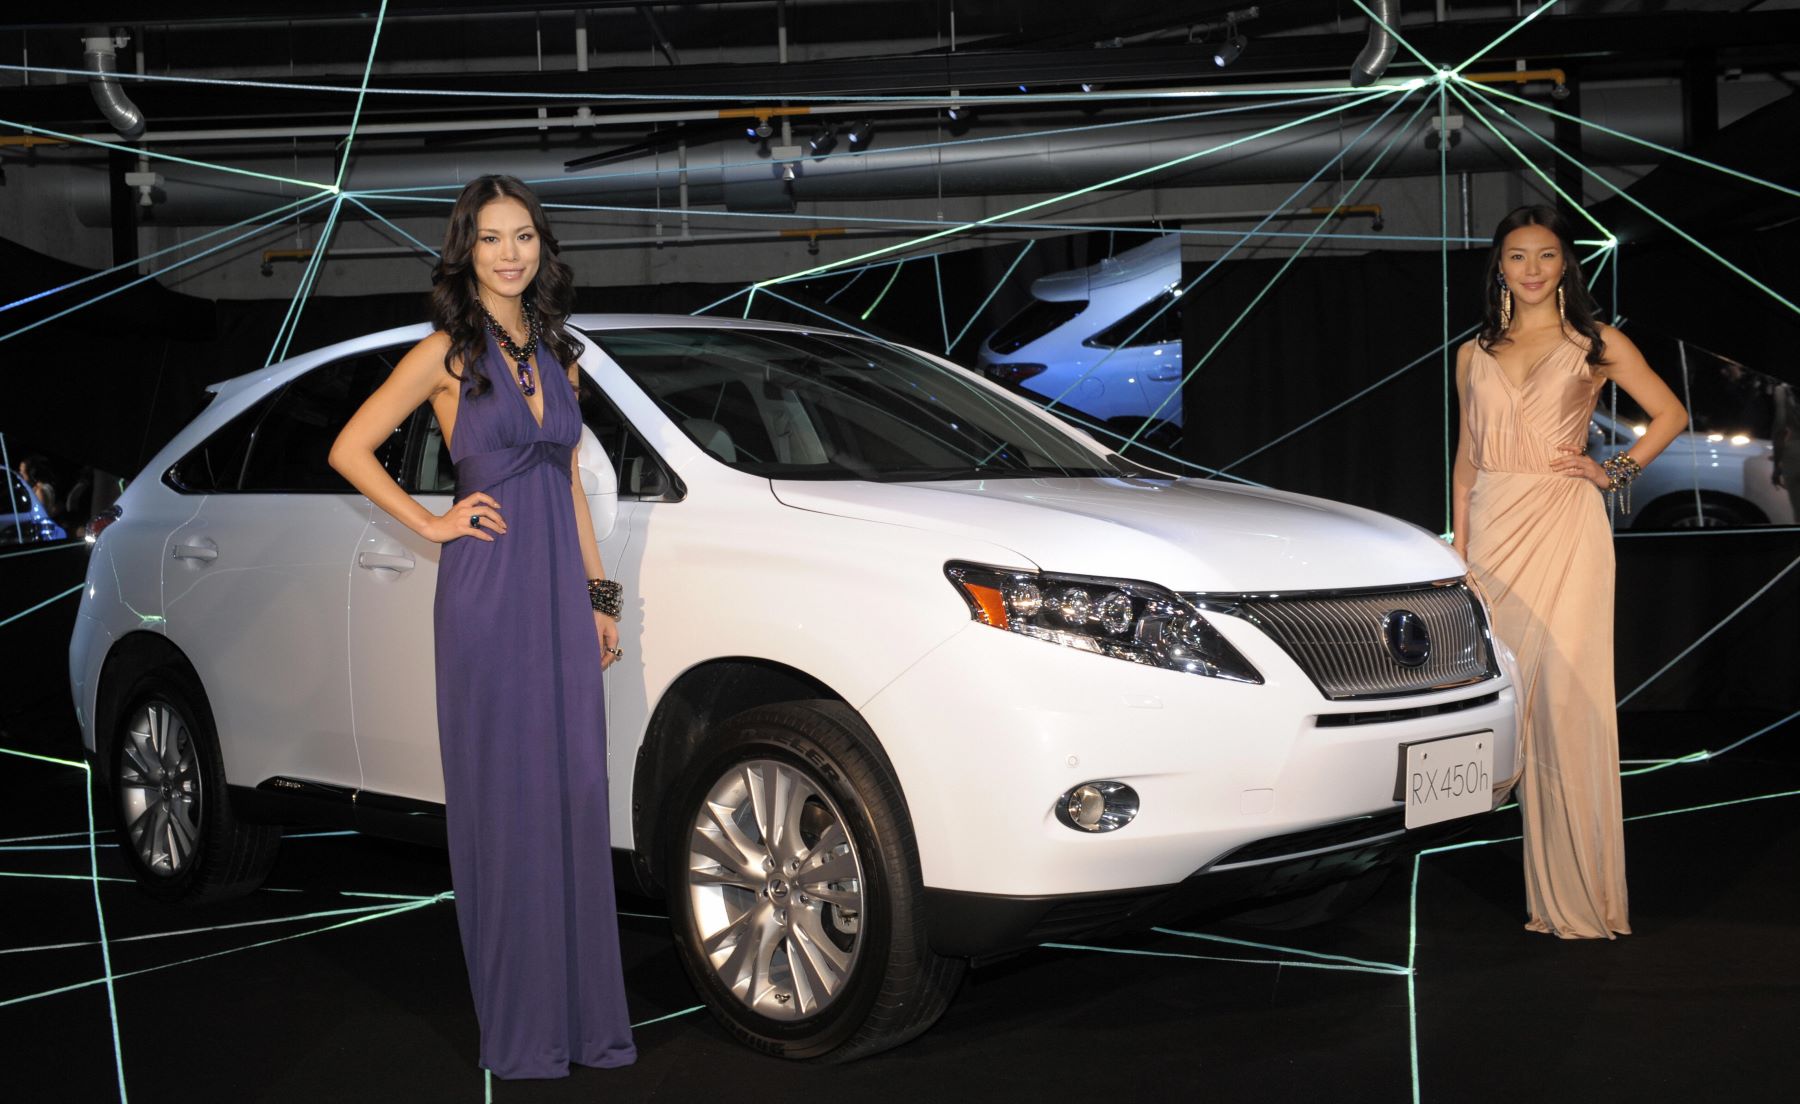 Lexus RX 350 and RX450h on display from 2007 Miss Universe winner and runner-up